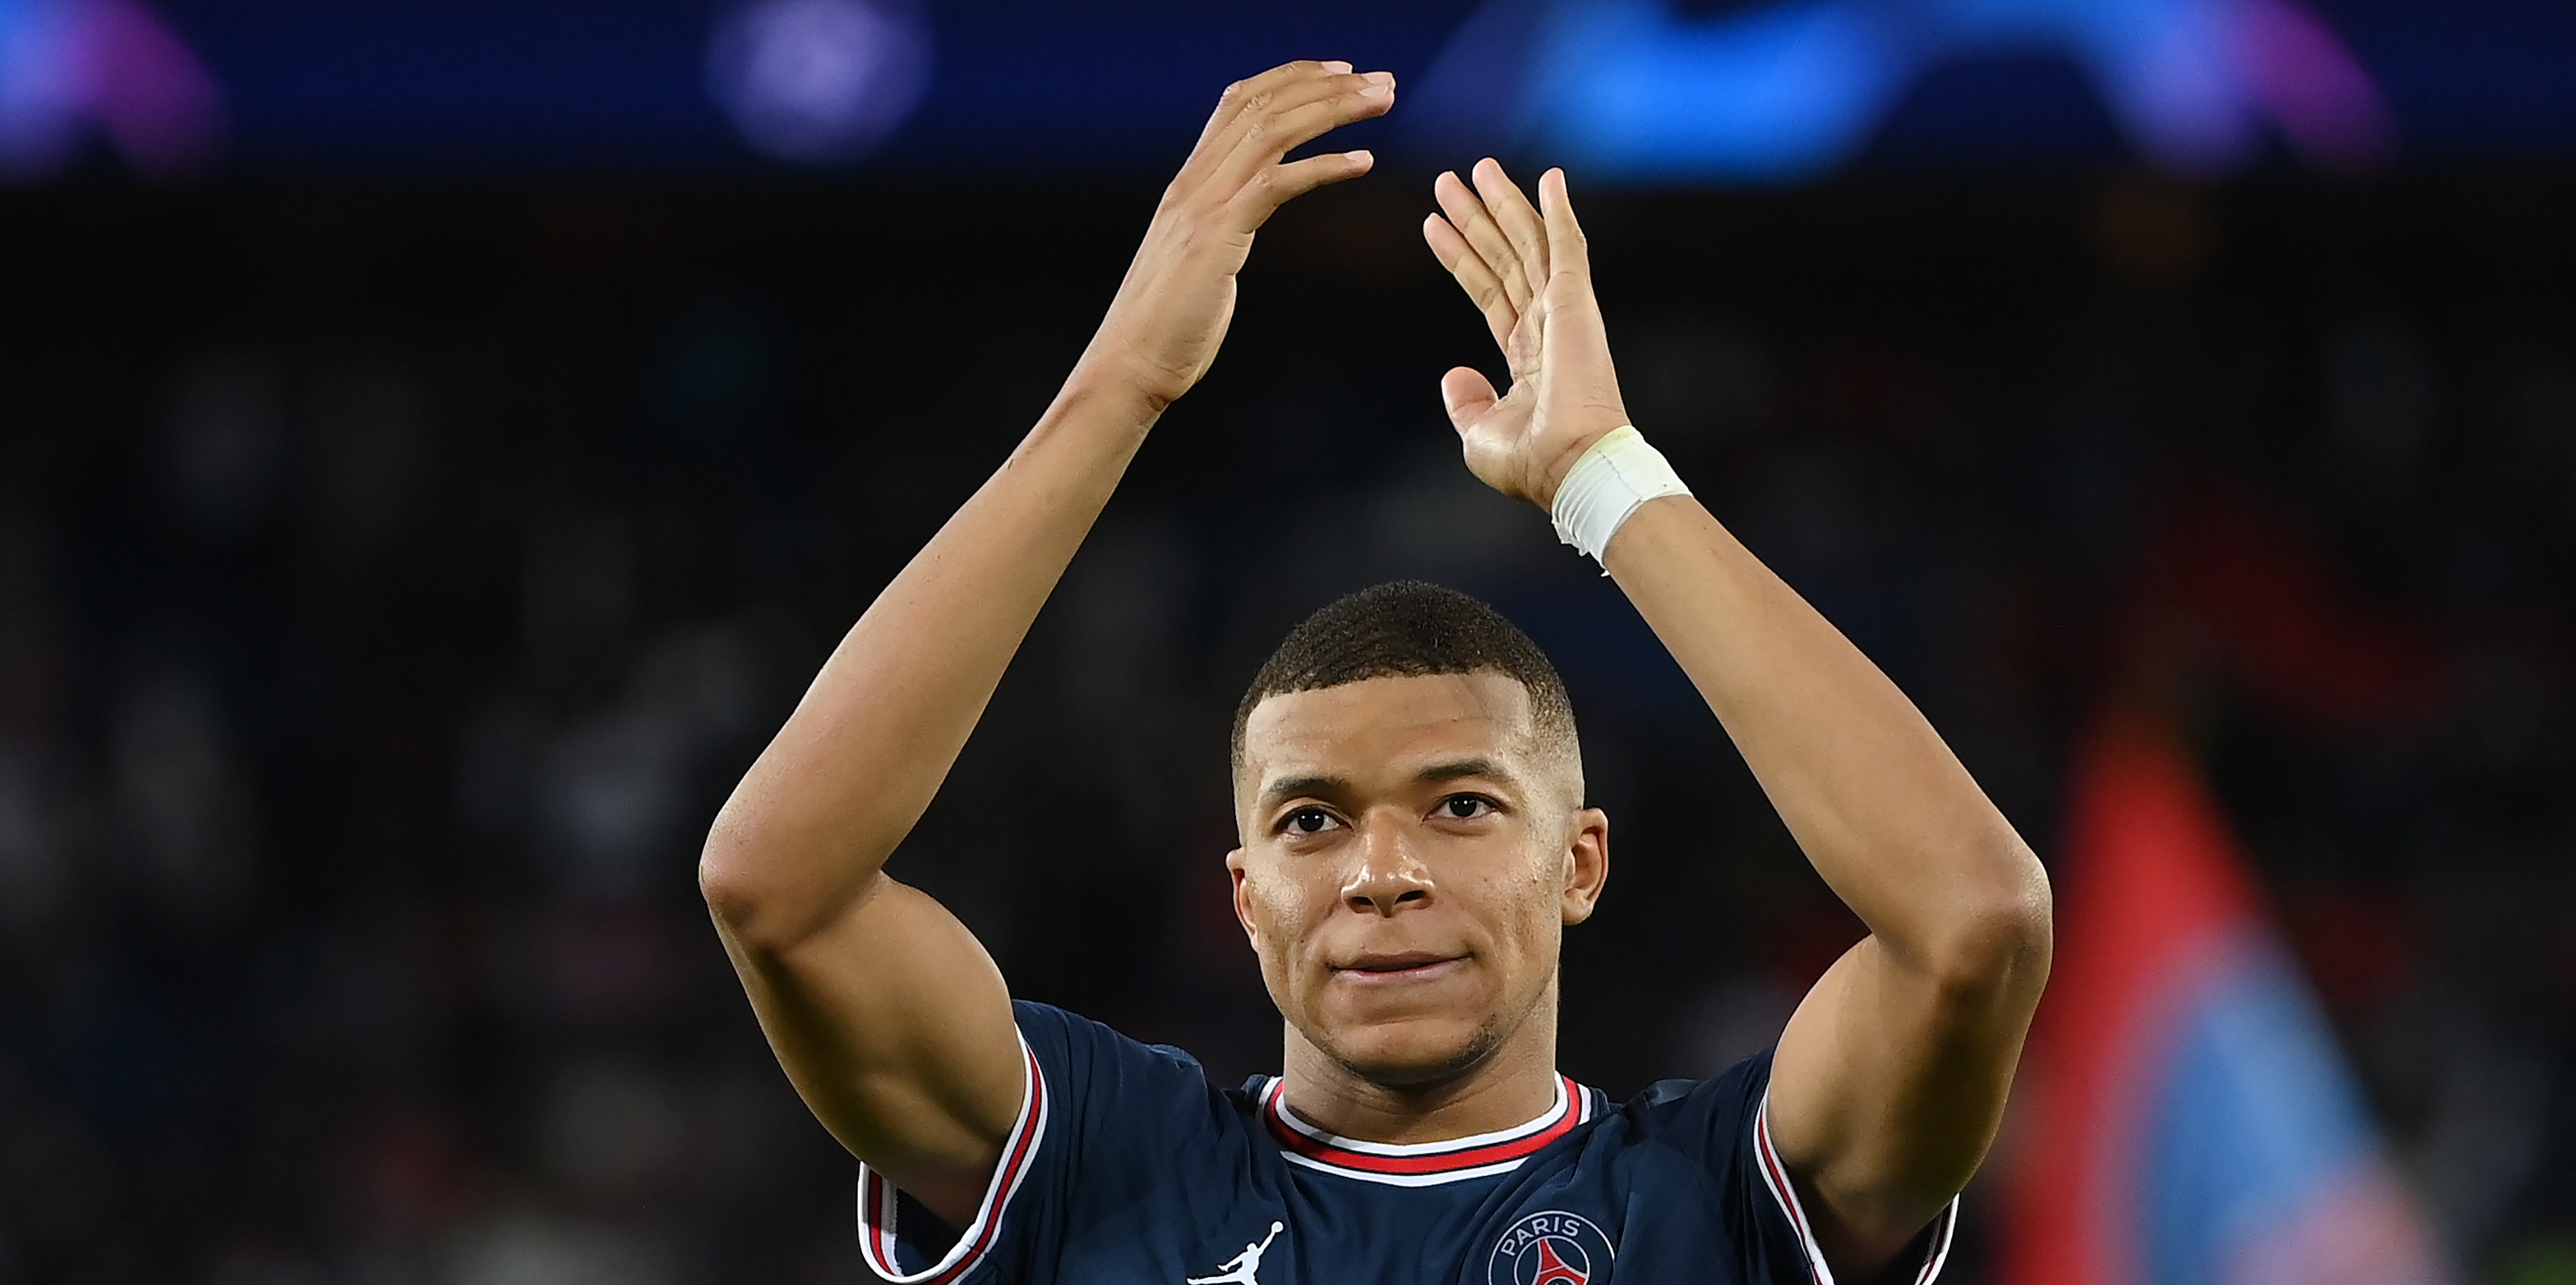 ‘We are in talks’ – Kylian Mbappe’s mother issues update on reported Liverpool target’s future